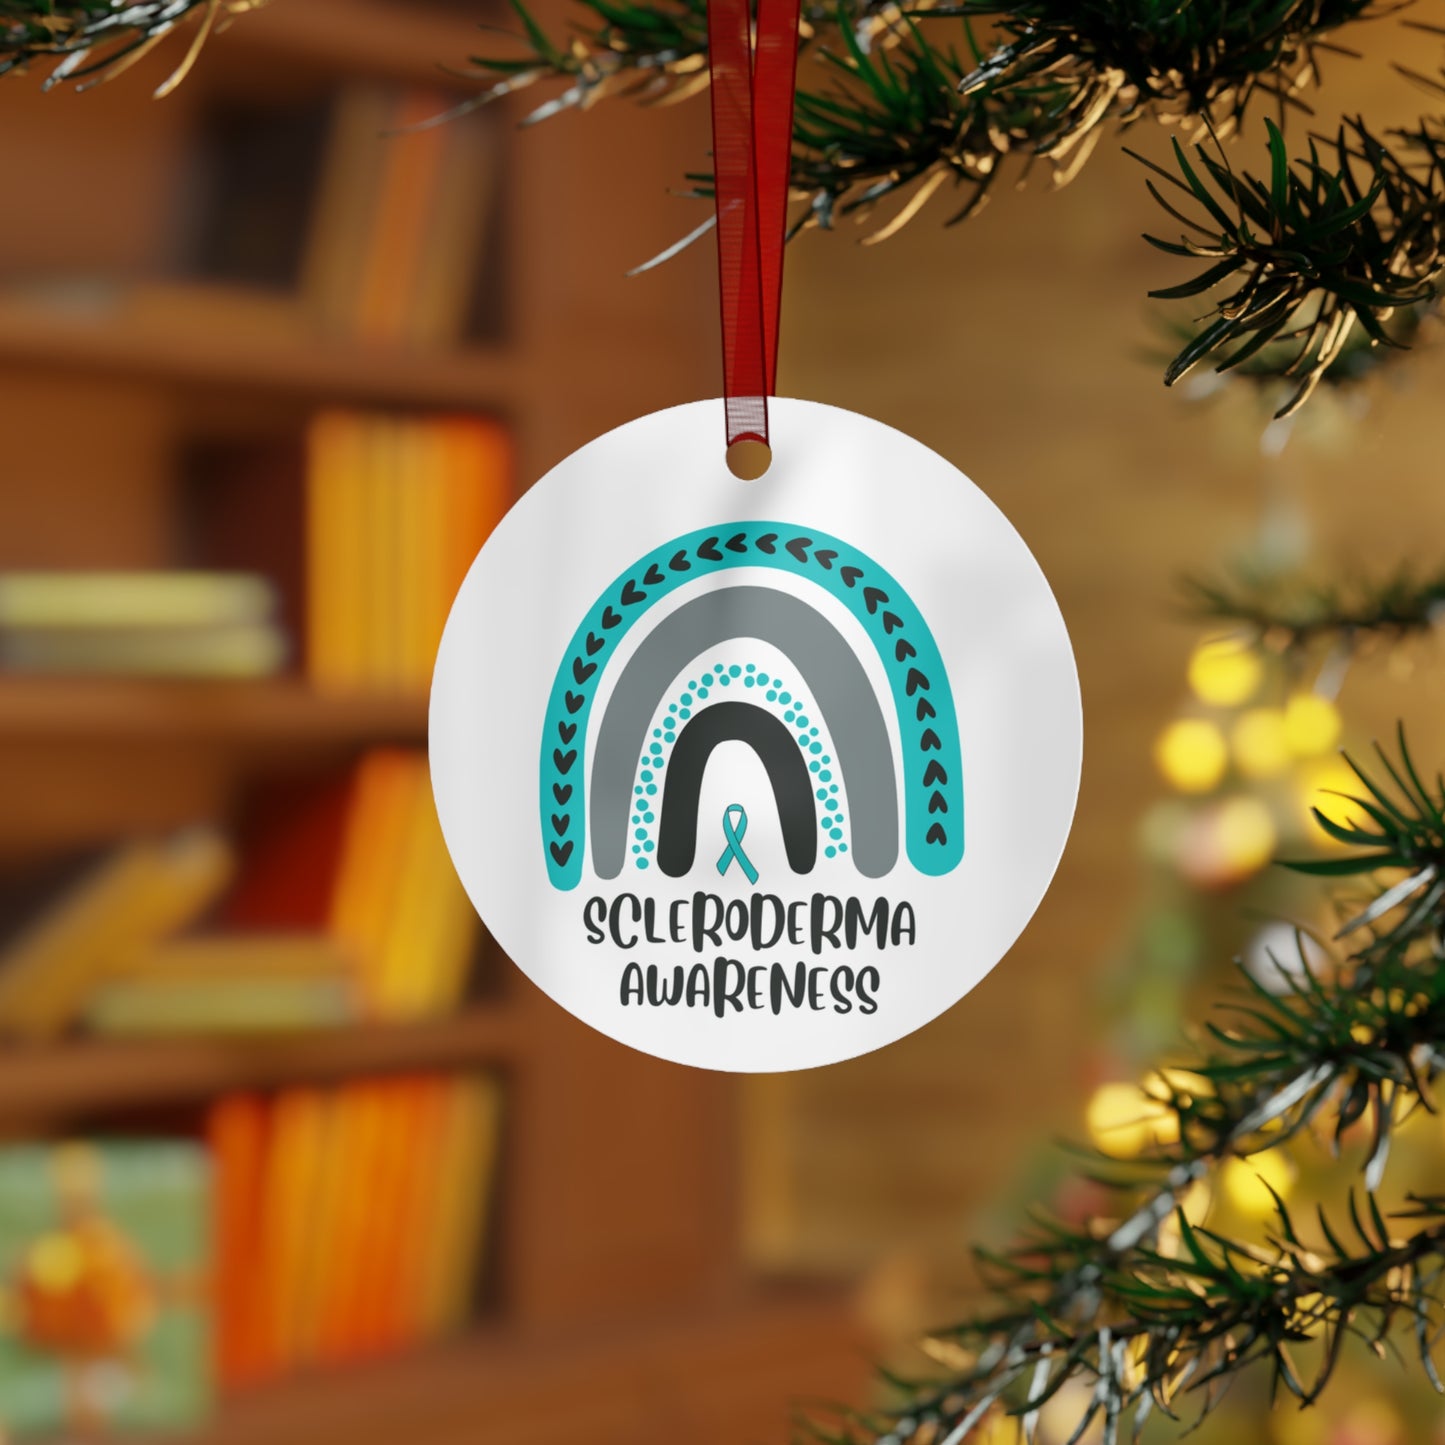 Scleroderma Awareness Christmas Ornament Stocking Stuffer Christmas Gift, Holiday Home Decor, Wall Hanging, Support for Friend